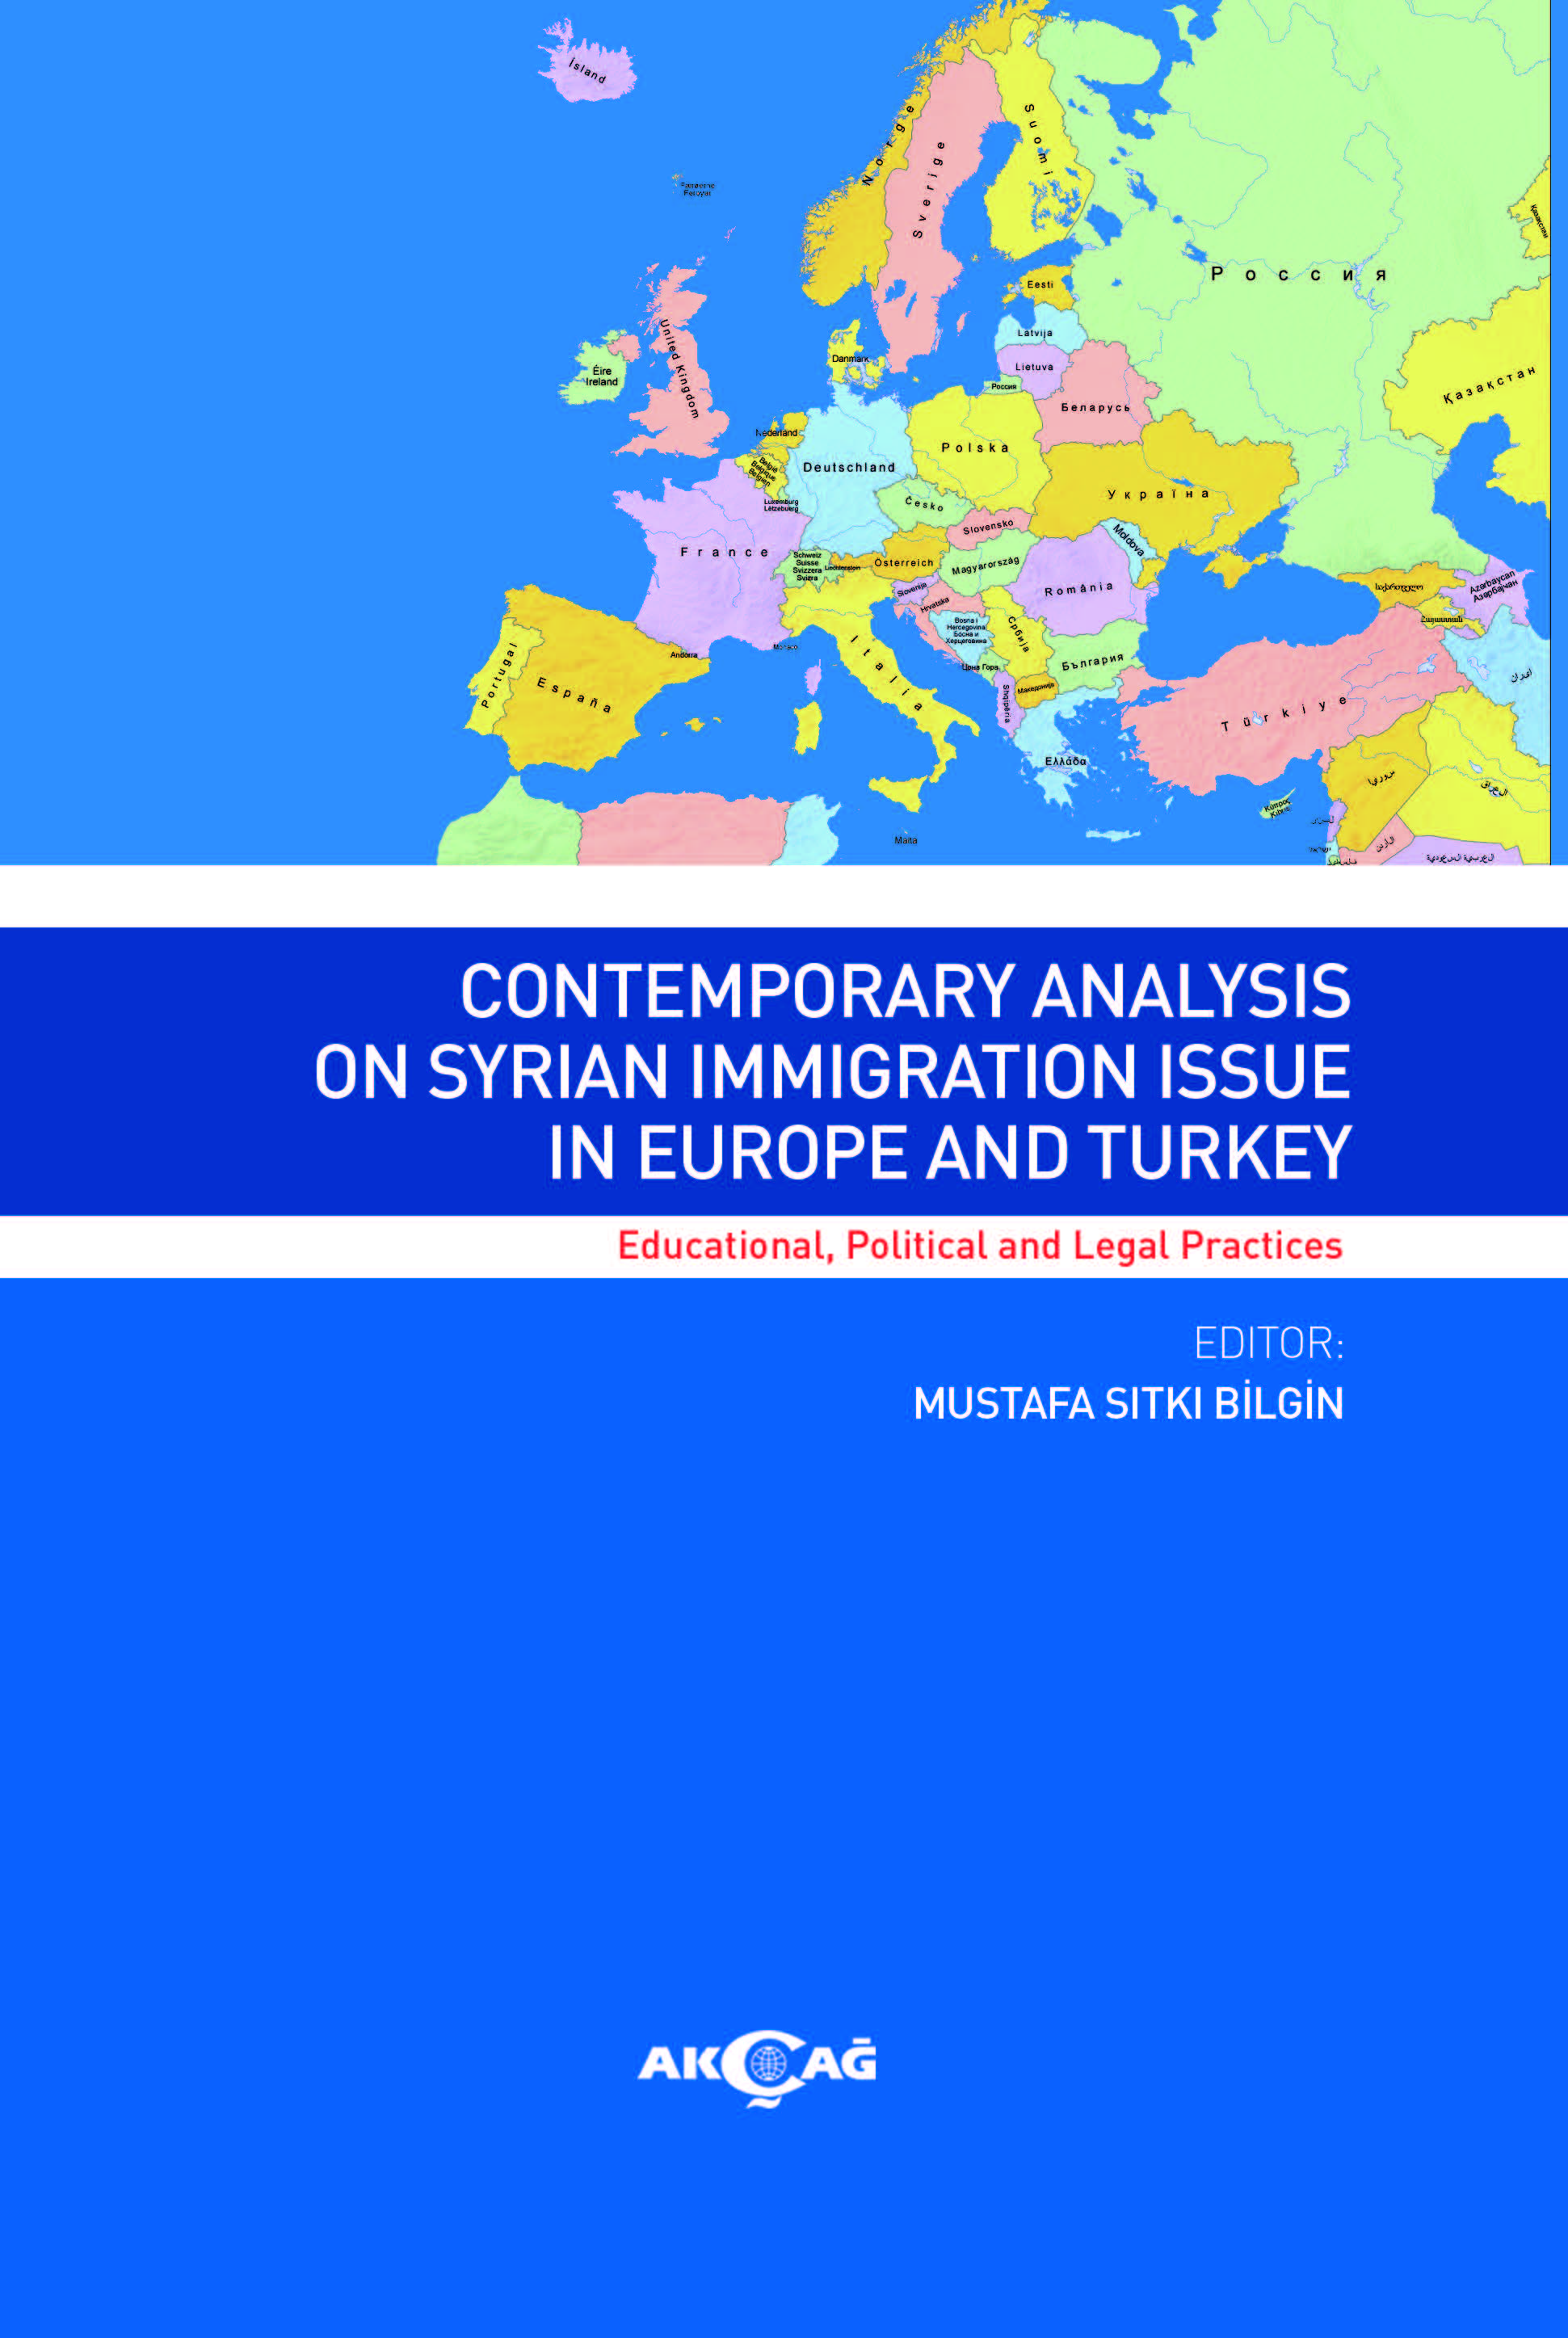 CONTEMPORARY ANALYSIS ON SYRIAN IMMIGRATION ISSUE IN EUROPE AND TURKEY